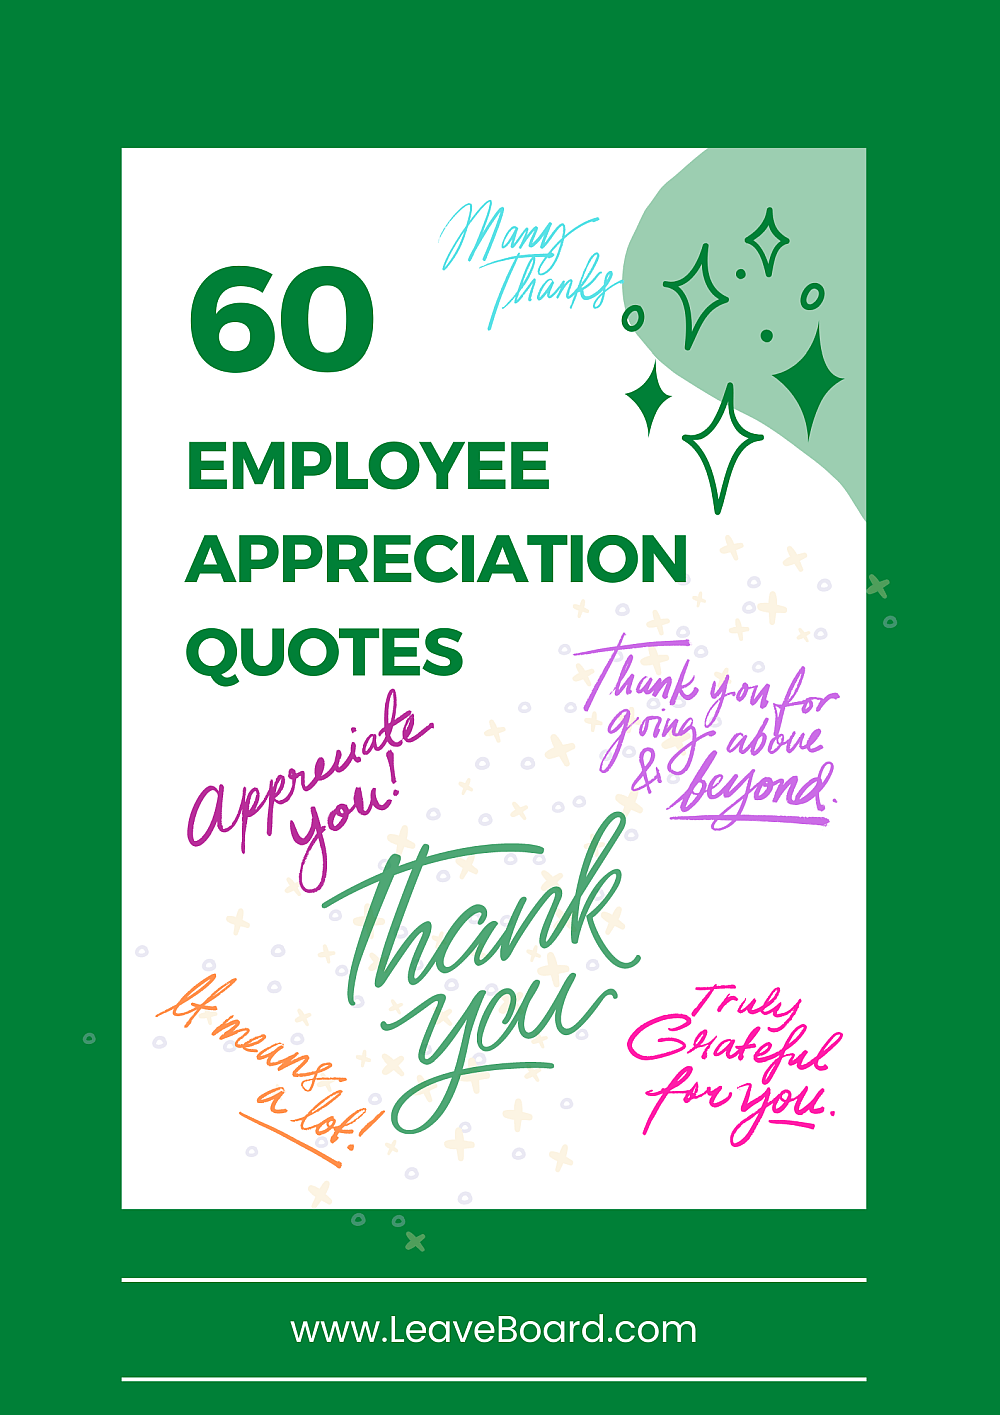 60 Employee Appreciation Quotes for Every Occasion | LeaveBoard